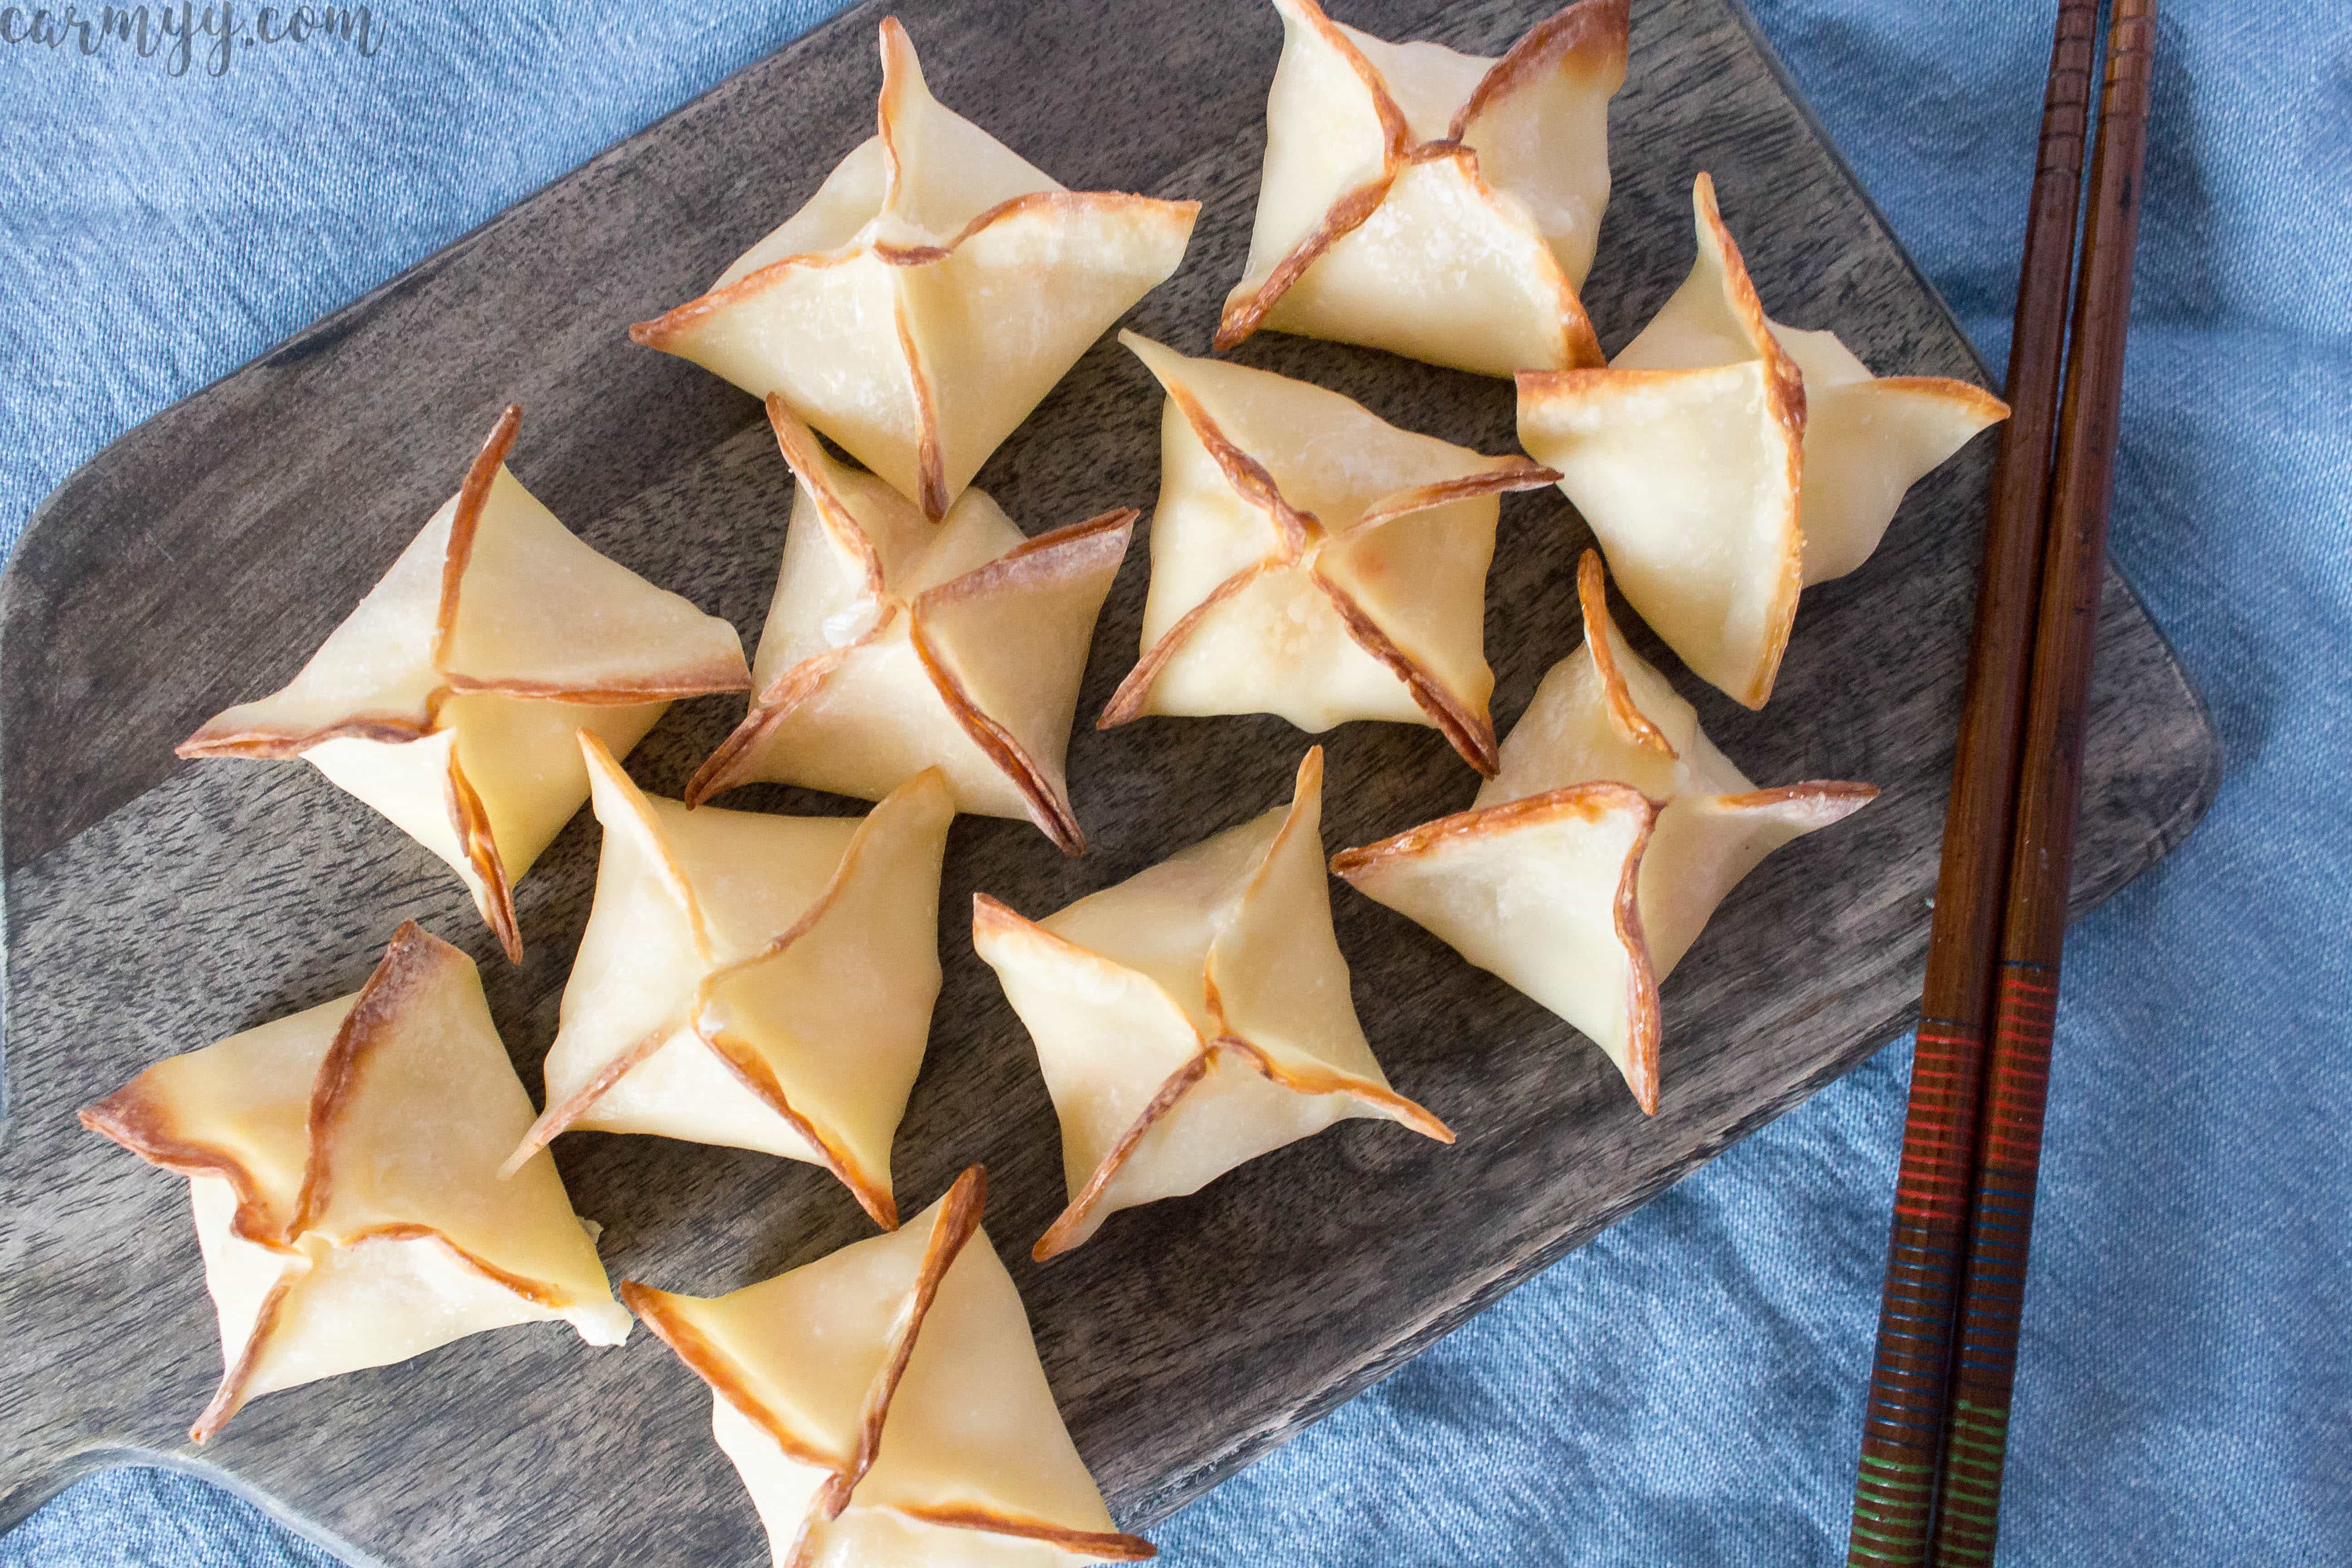 These baked cheesy shrimp wontons are easy to make and are the perfect crowd pleaser for parties or get togethers. Inspired by the deep fried shrimp wontons from sushi restaurants, this is a healthier version made by baking instead.